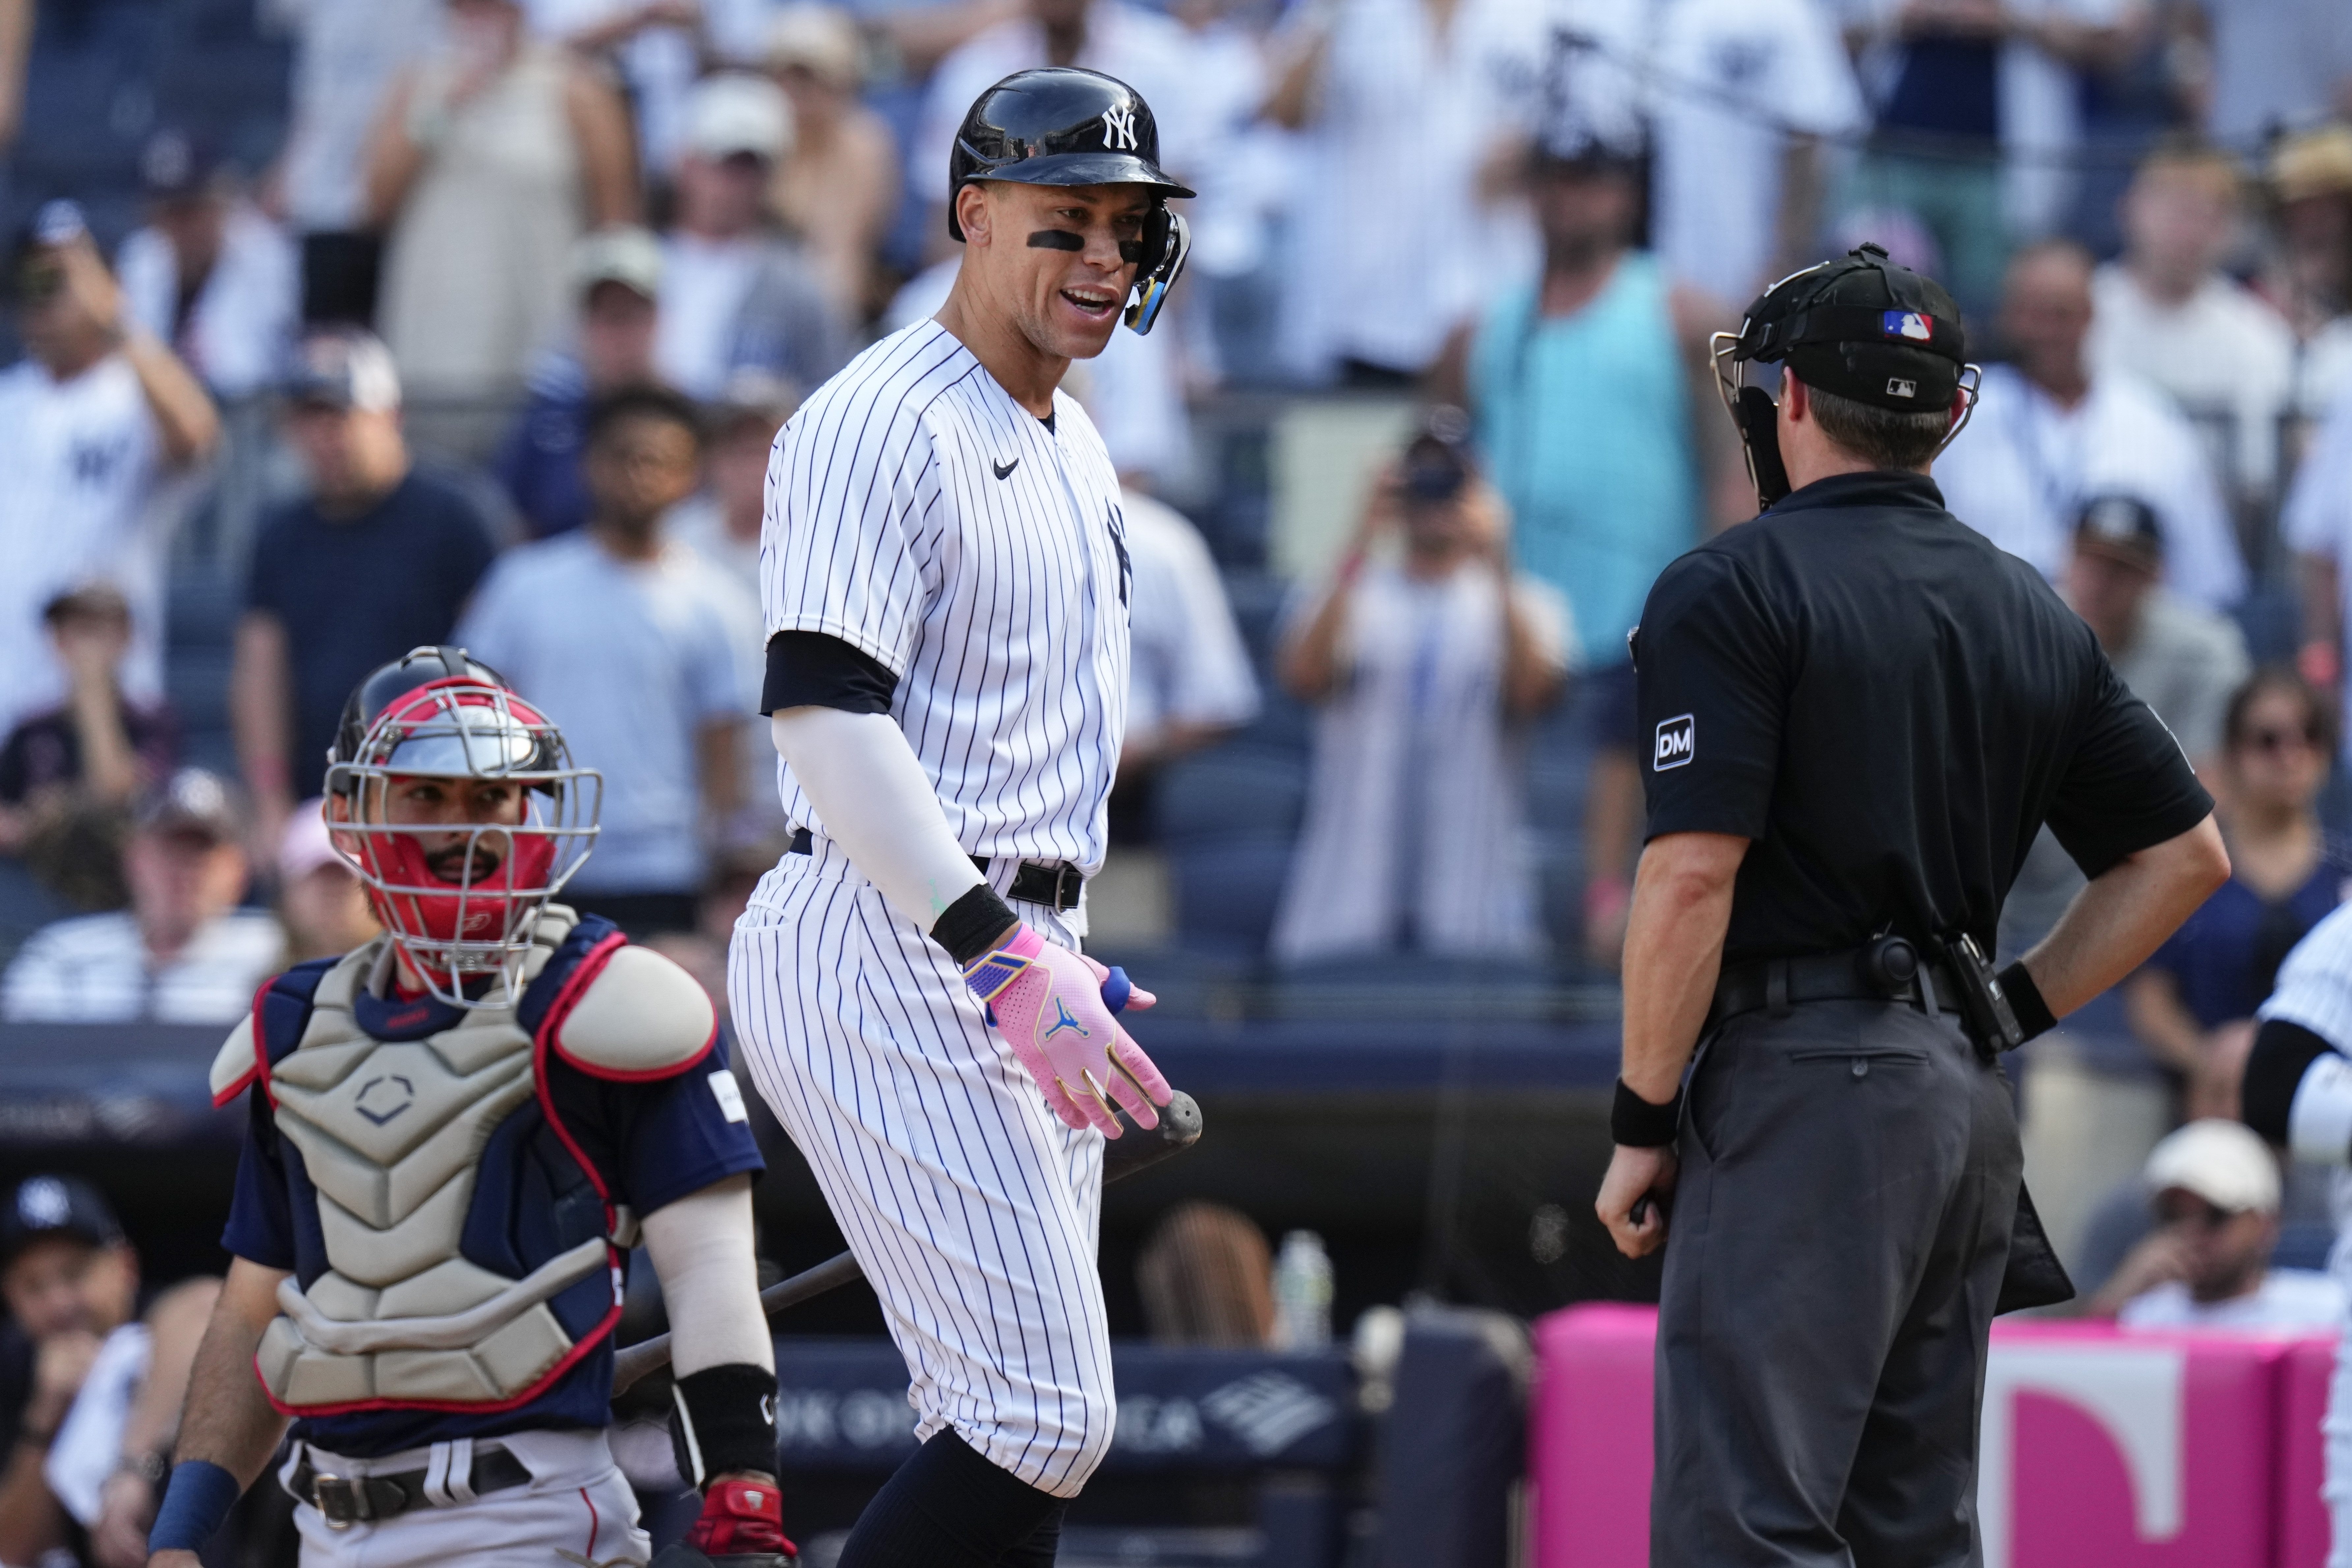 NY Yankees lose 8 in row for first time since 1995 as Red Sox win